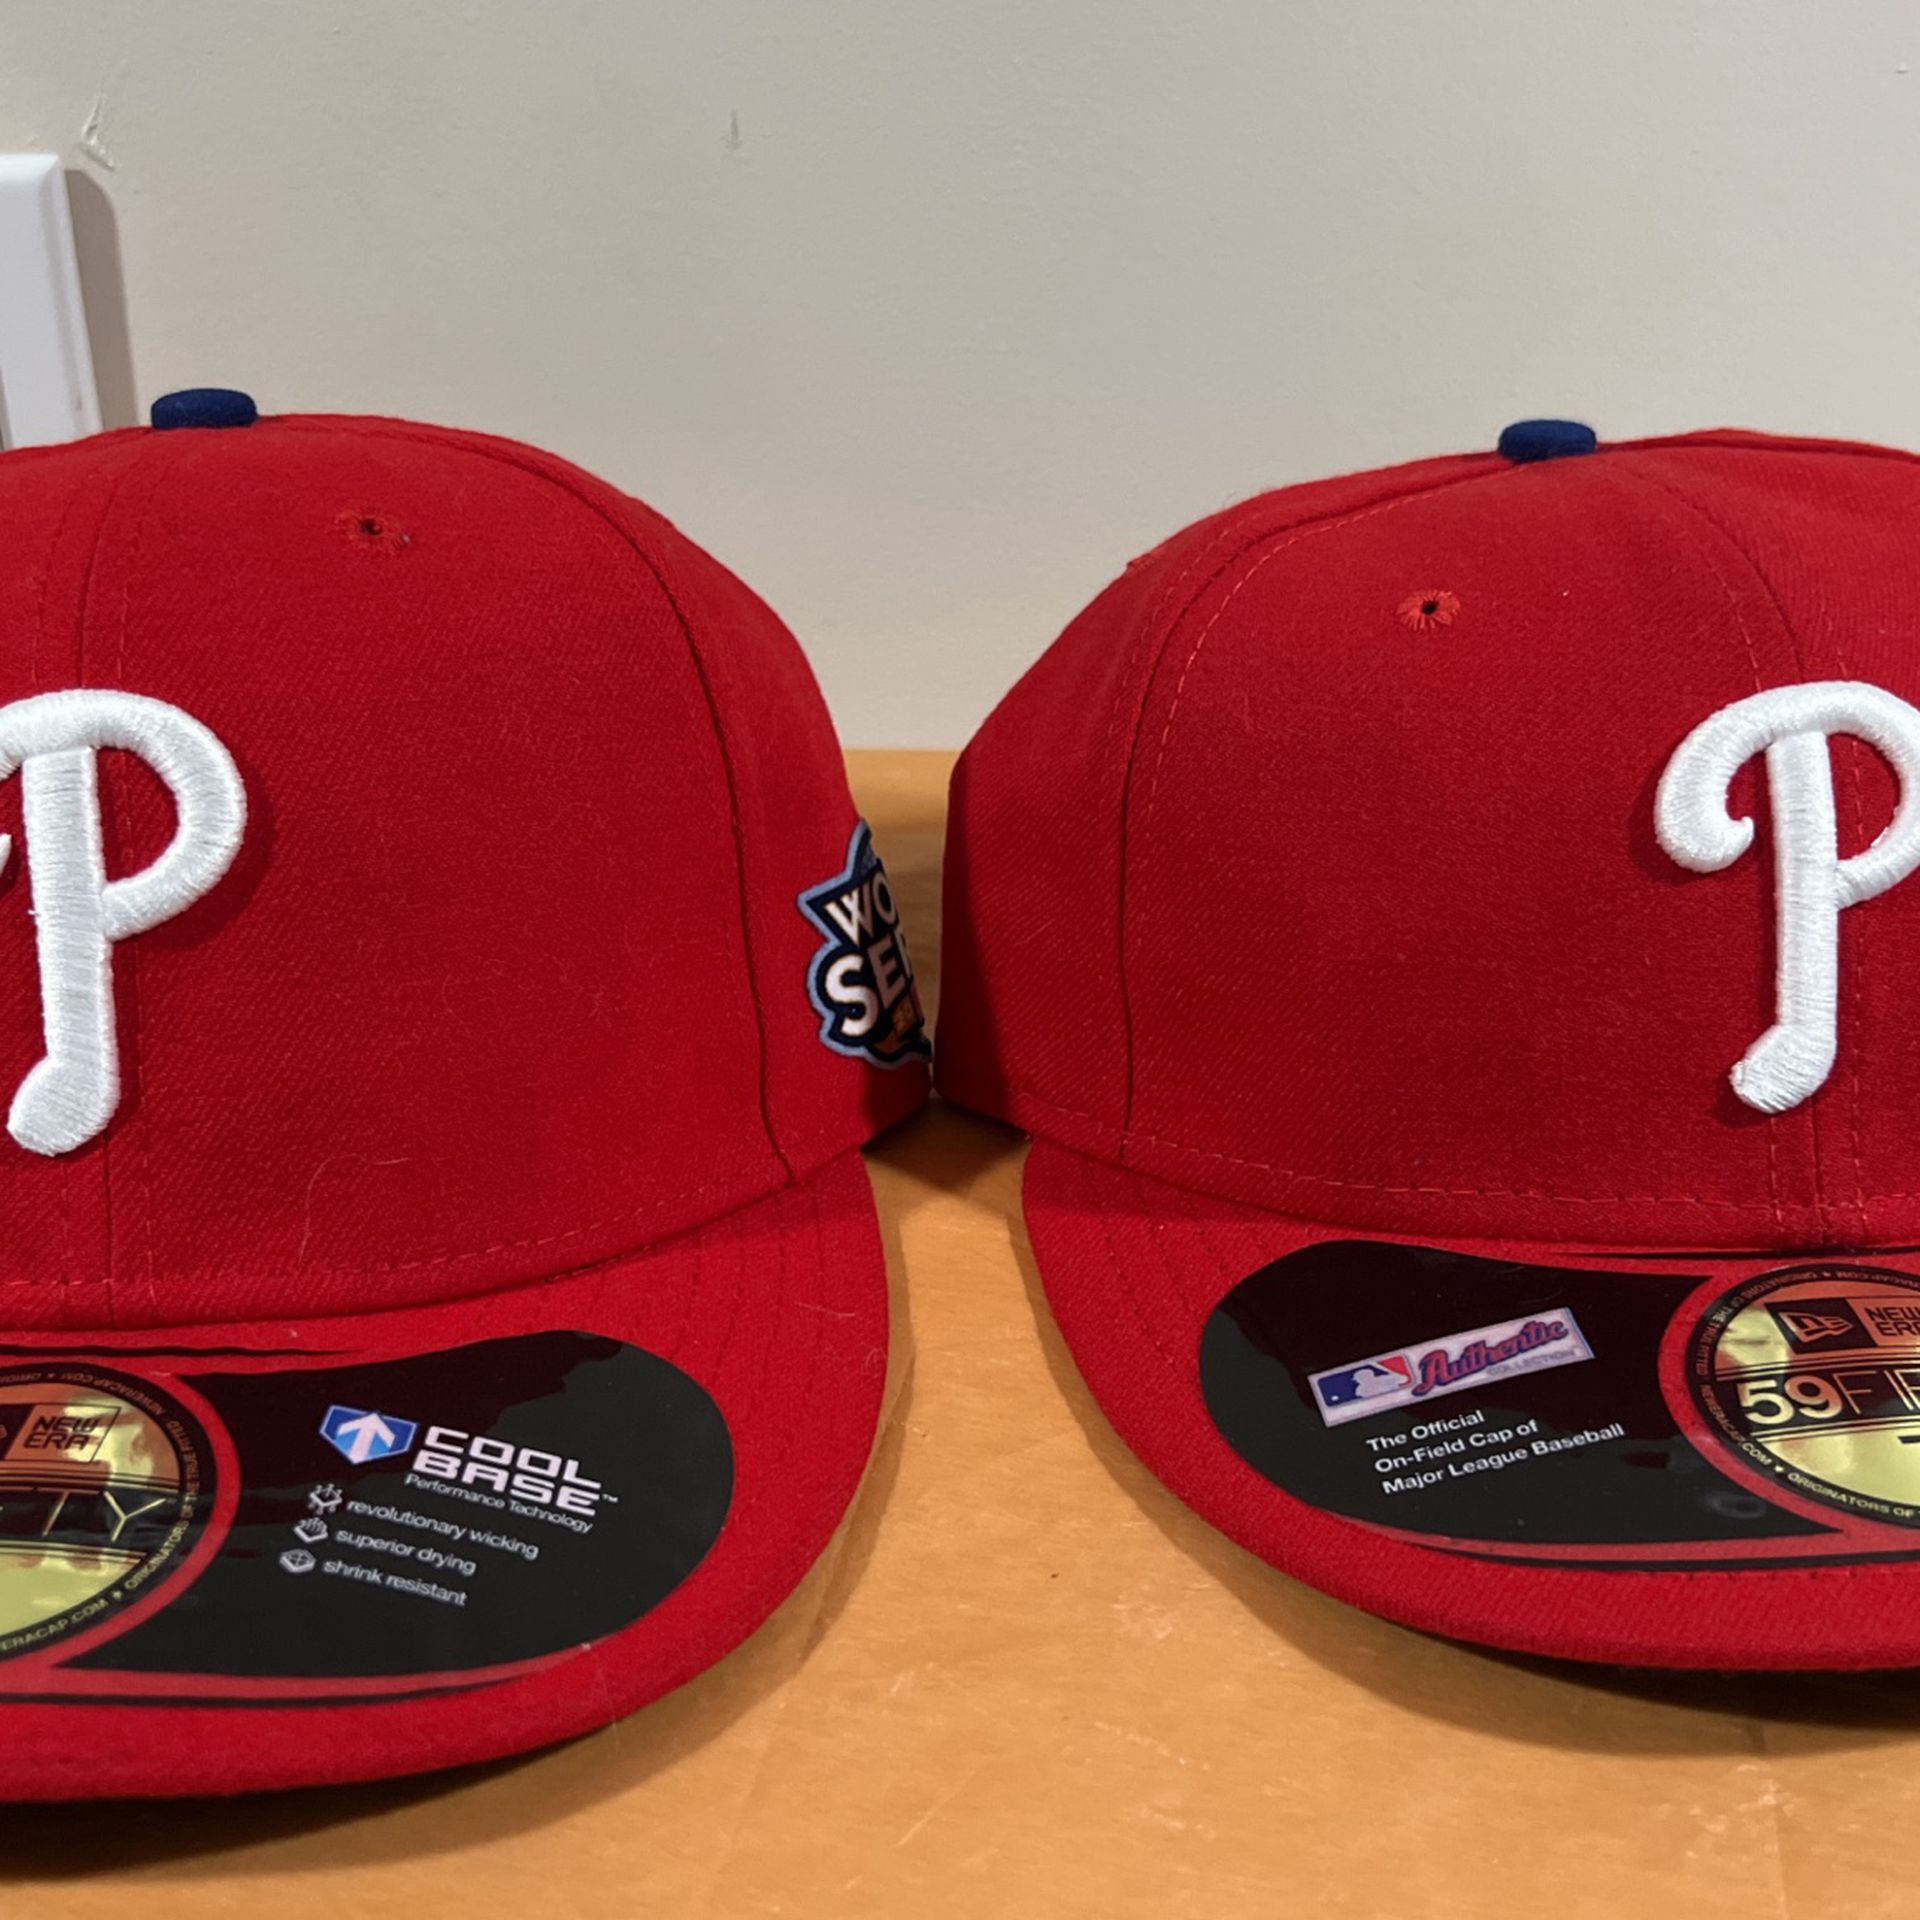 Two Philly Hats For $45 World Series 08 And 09 Sizes 7 1/8